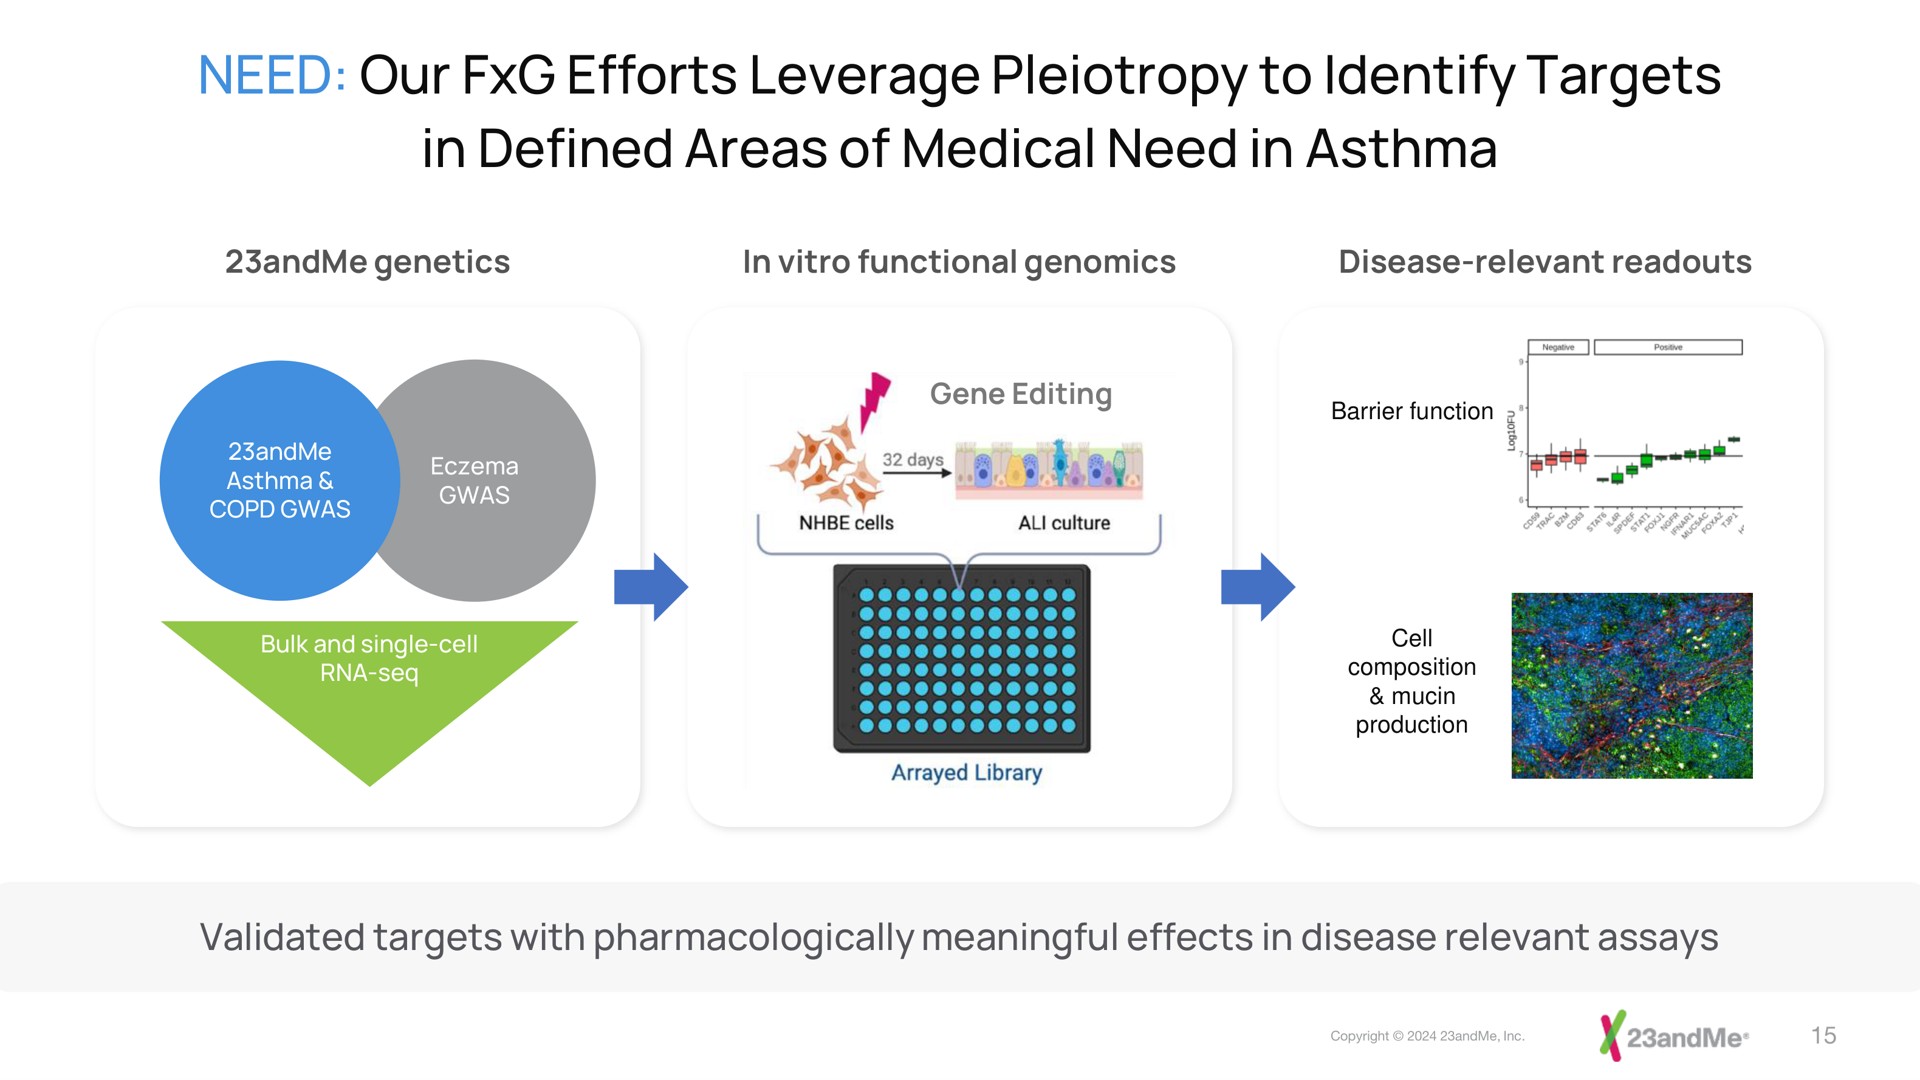 need our efforts leverage to identify targets in defined areas of medical need in asthma | 23andMe